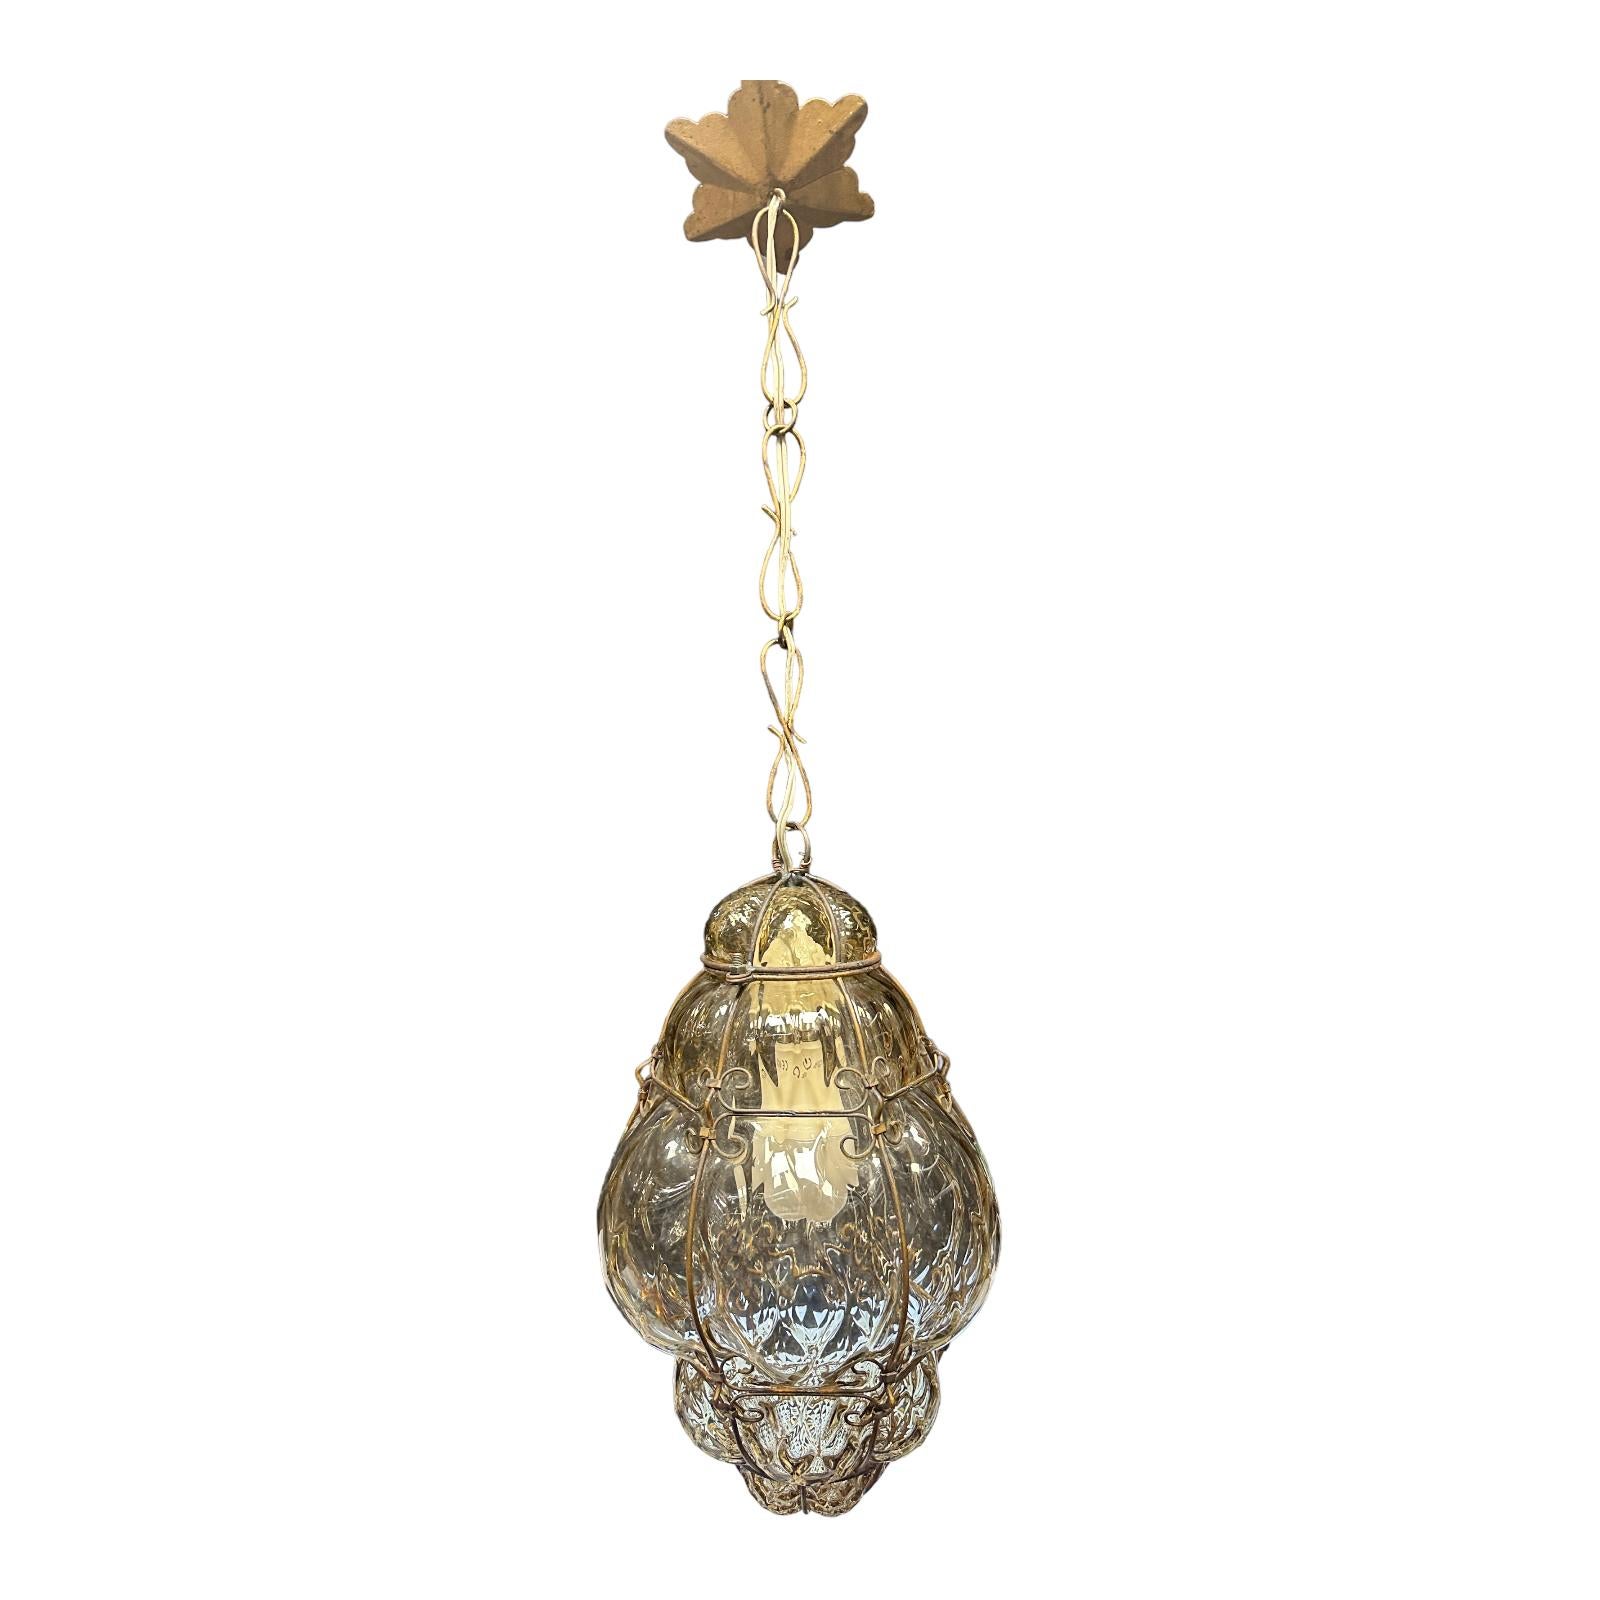 Pair of Petite Murano Caged Glass Pendant Light, 1930s Italy vintage For Sale 6